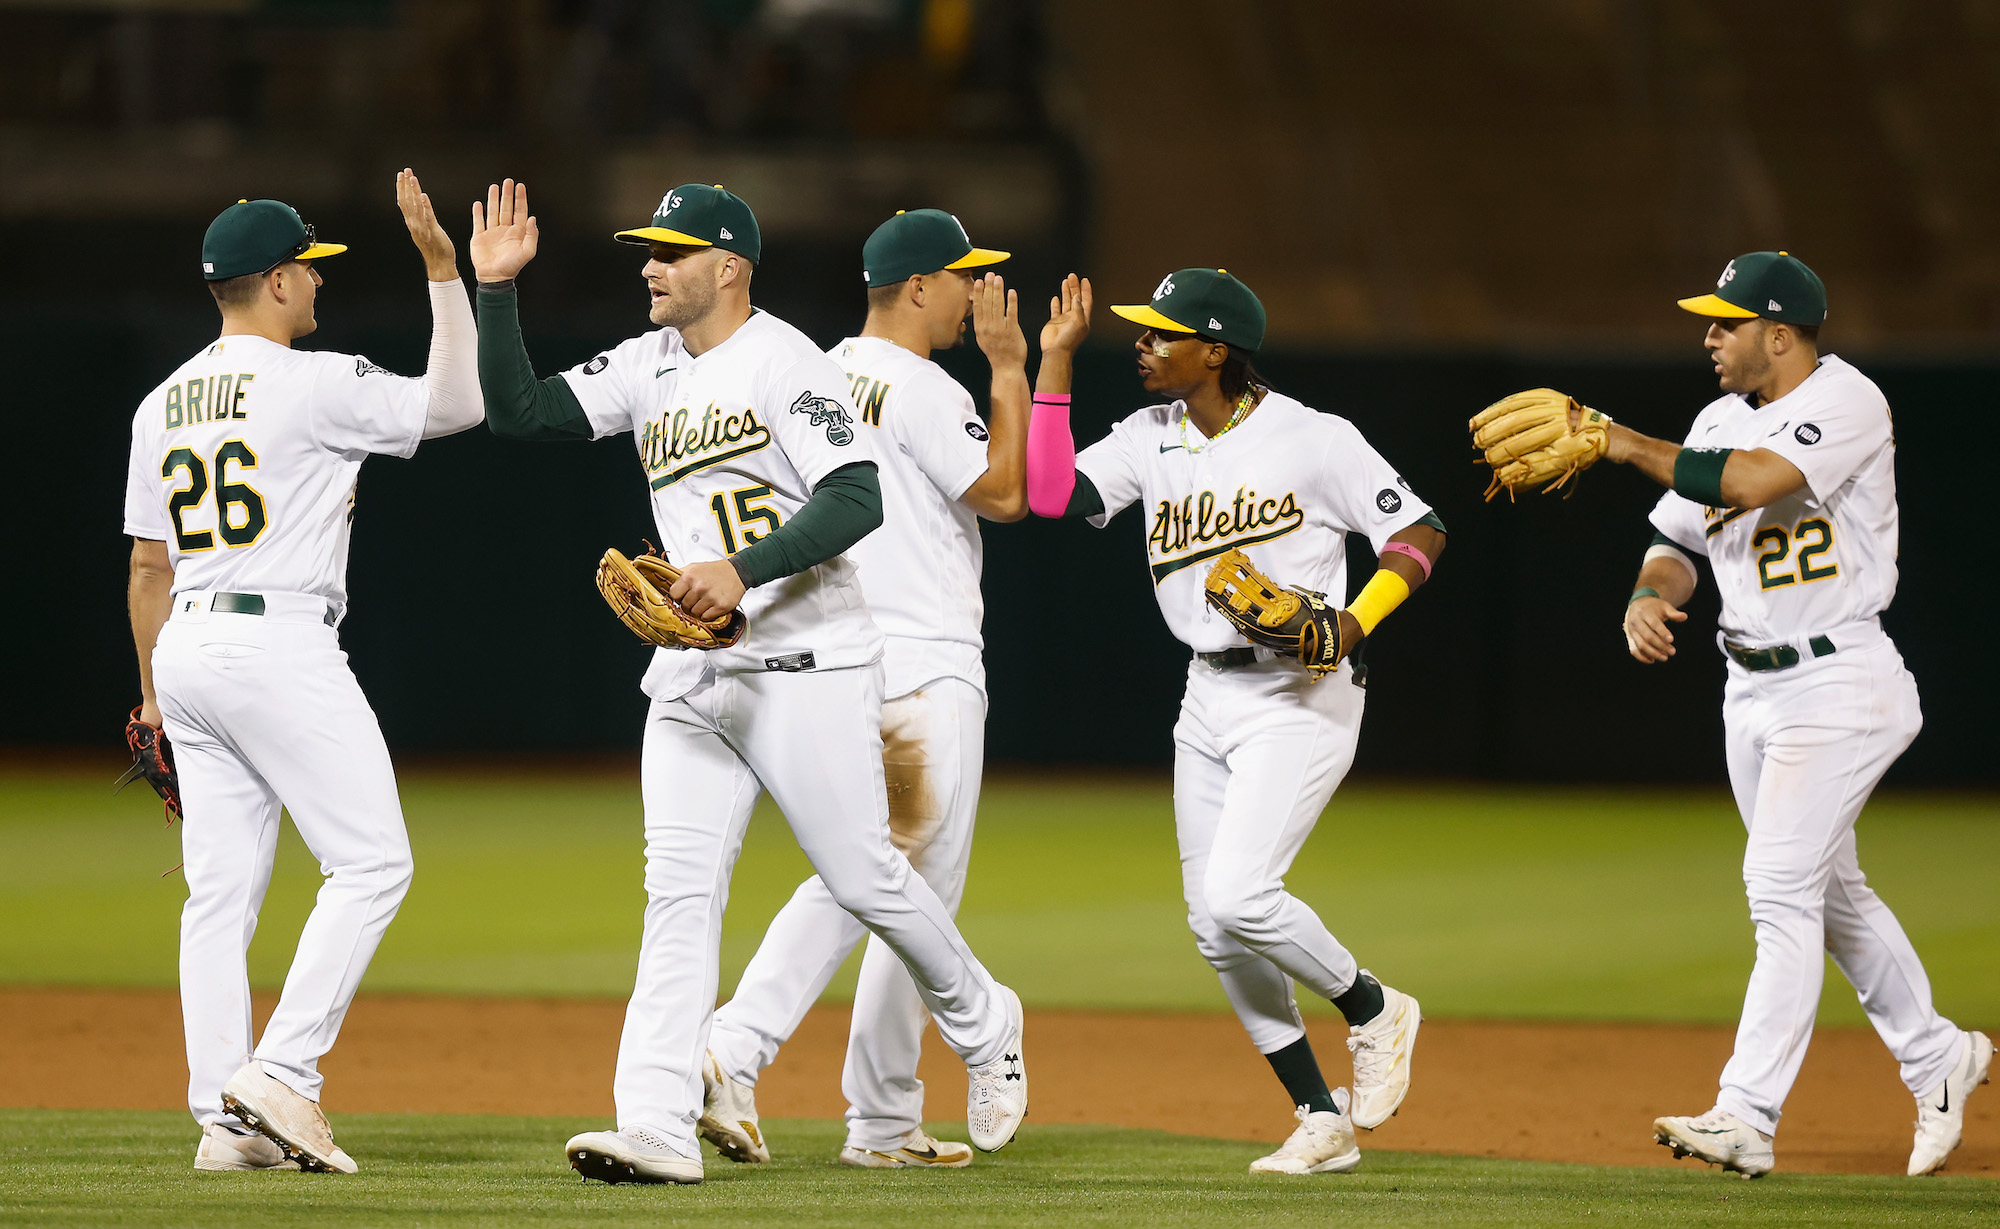 OAKLAND, CALIFORNIA - JUNE 12: Jonah Bride #26, Seth Brown #15, Jace Peterson #6, Esteury Ruiz #1 and Ramon Laureano #22 of the Oakland Athletics celebrate after a 4-3 win against the Tampa Bay Rays at RingCentral Coliseum on June 12, 2023 in Oakland, California. (Photo by Lachlan Cunningham/Getty Images)